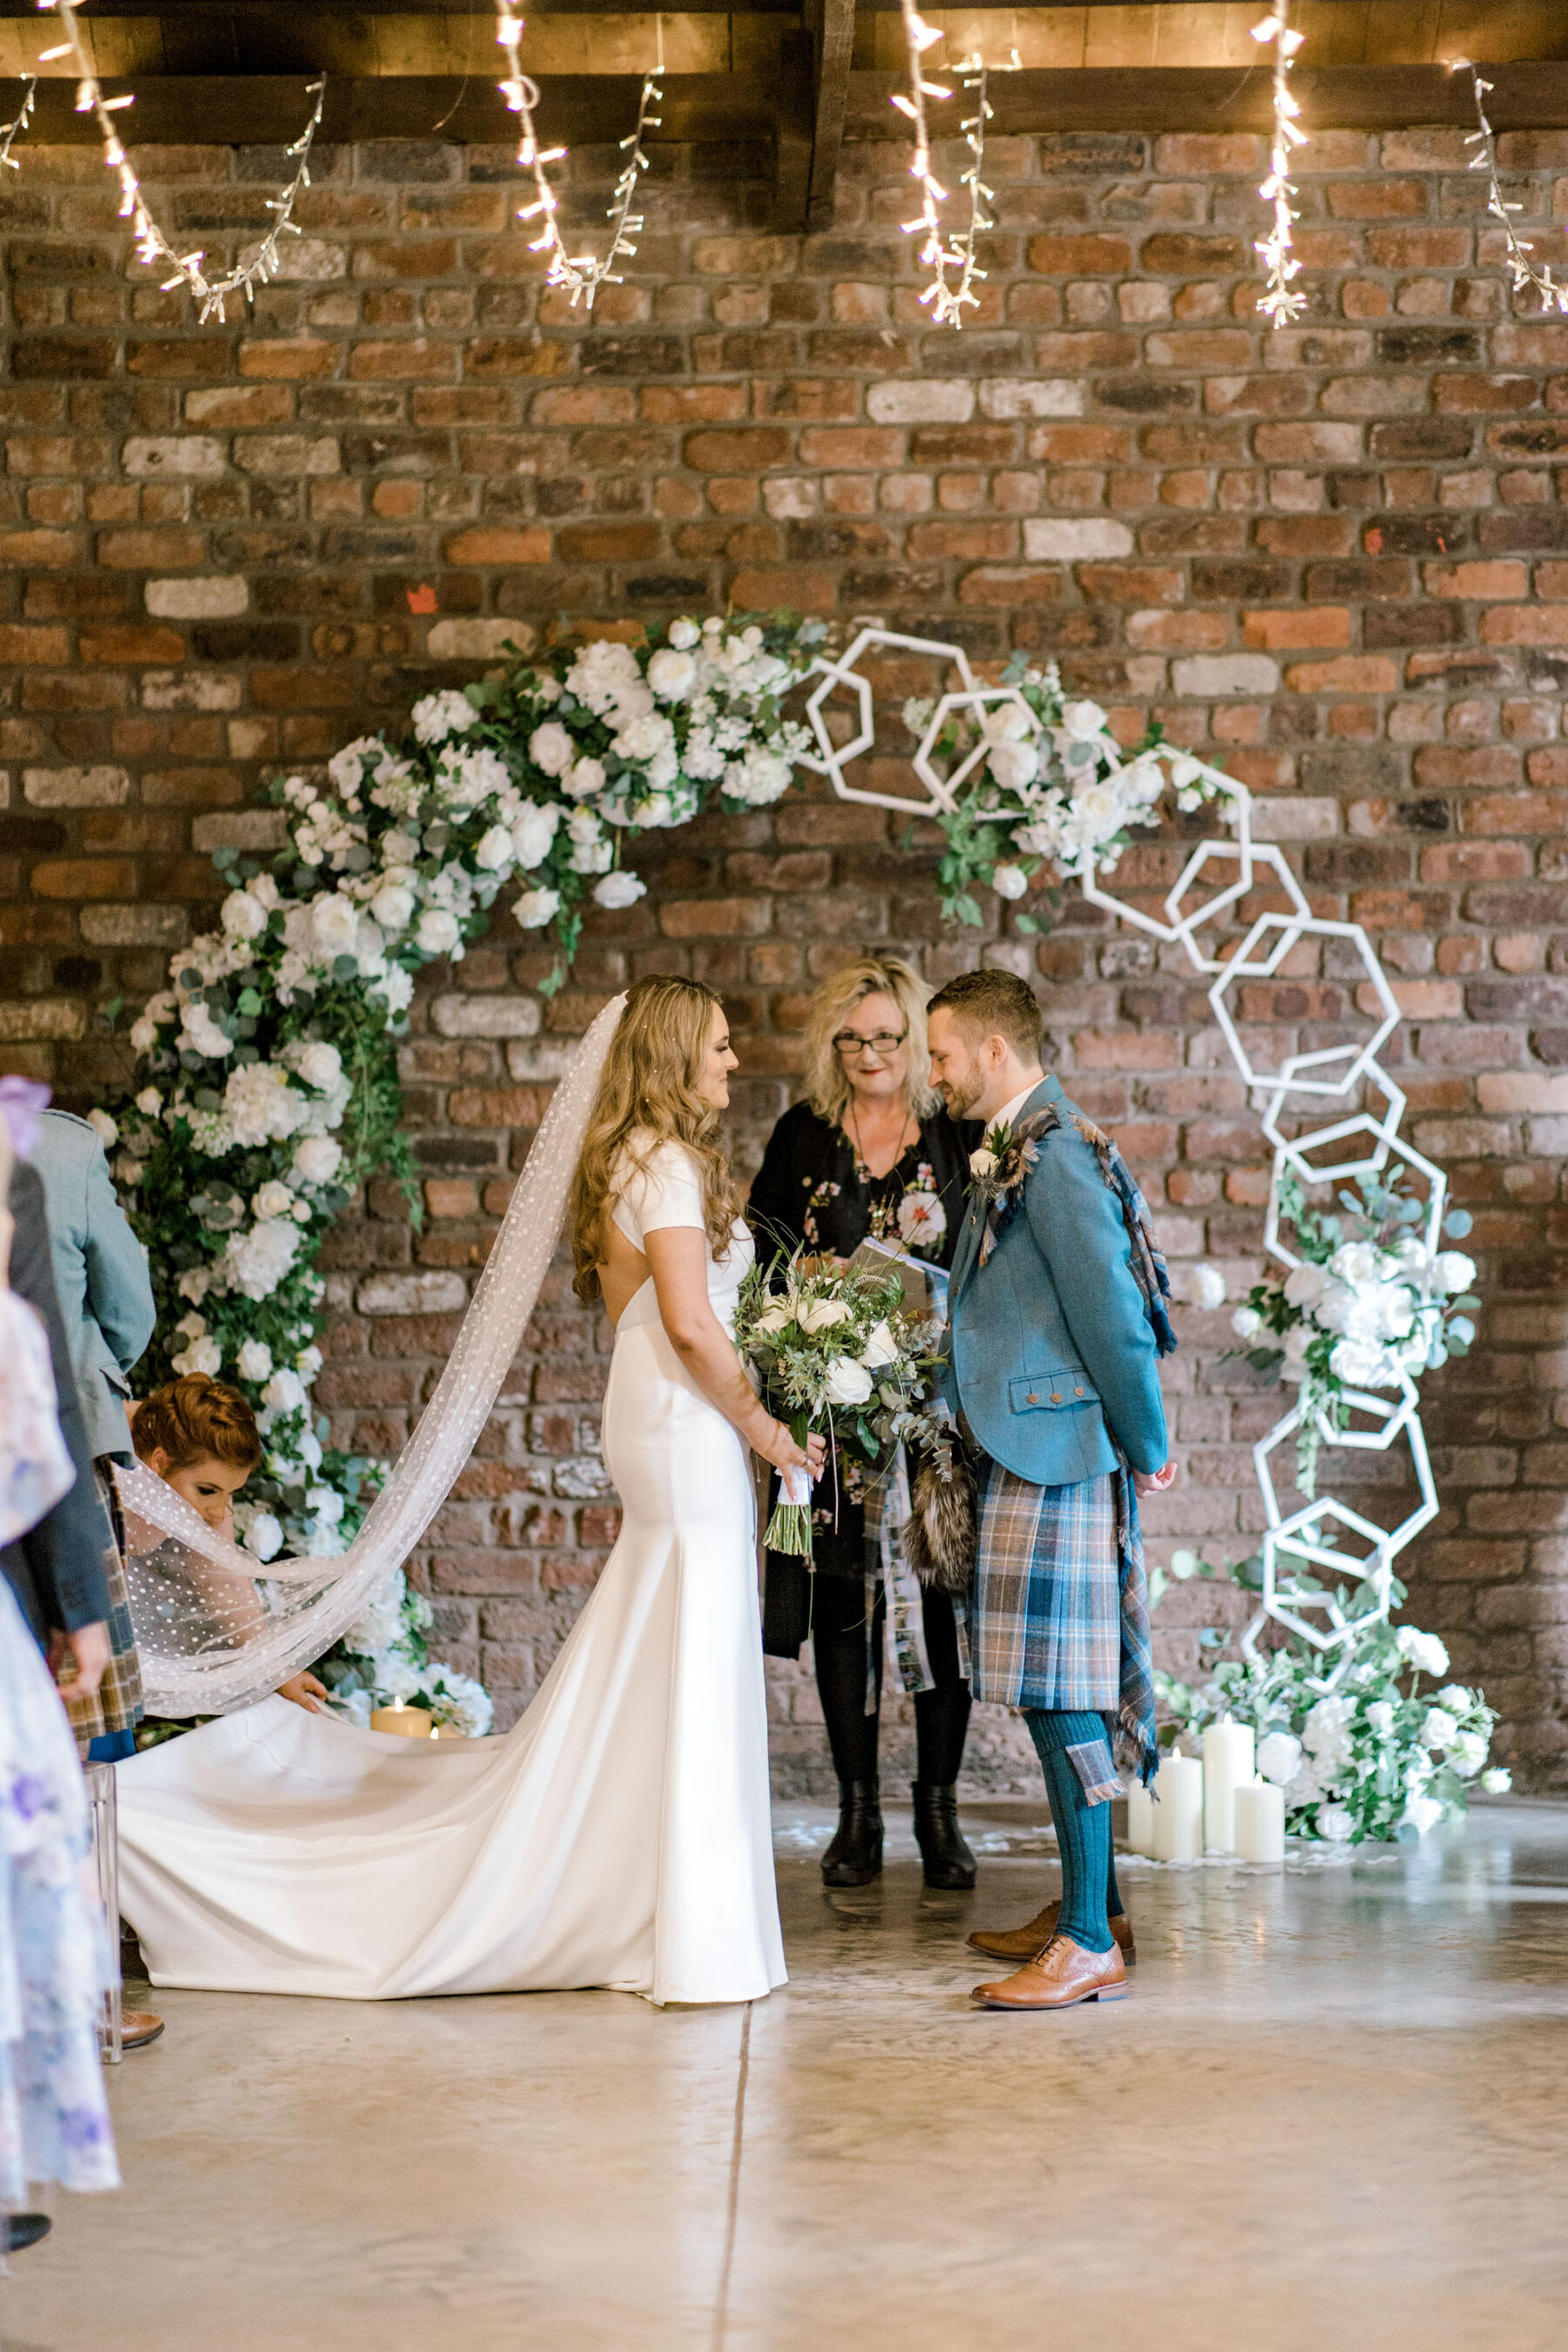 Bride and groom getting married by a floral arch at Glasgow Engine Works industrial wedding venue